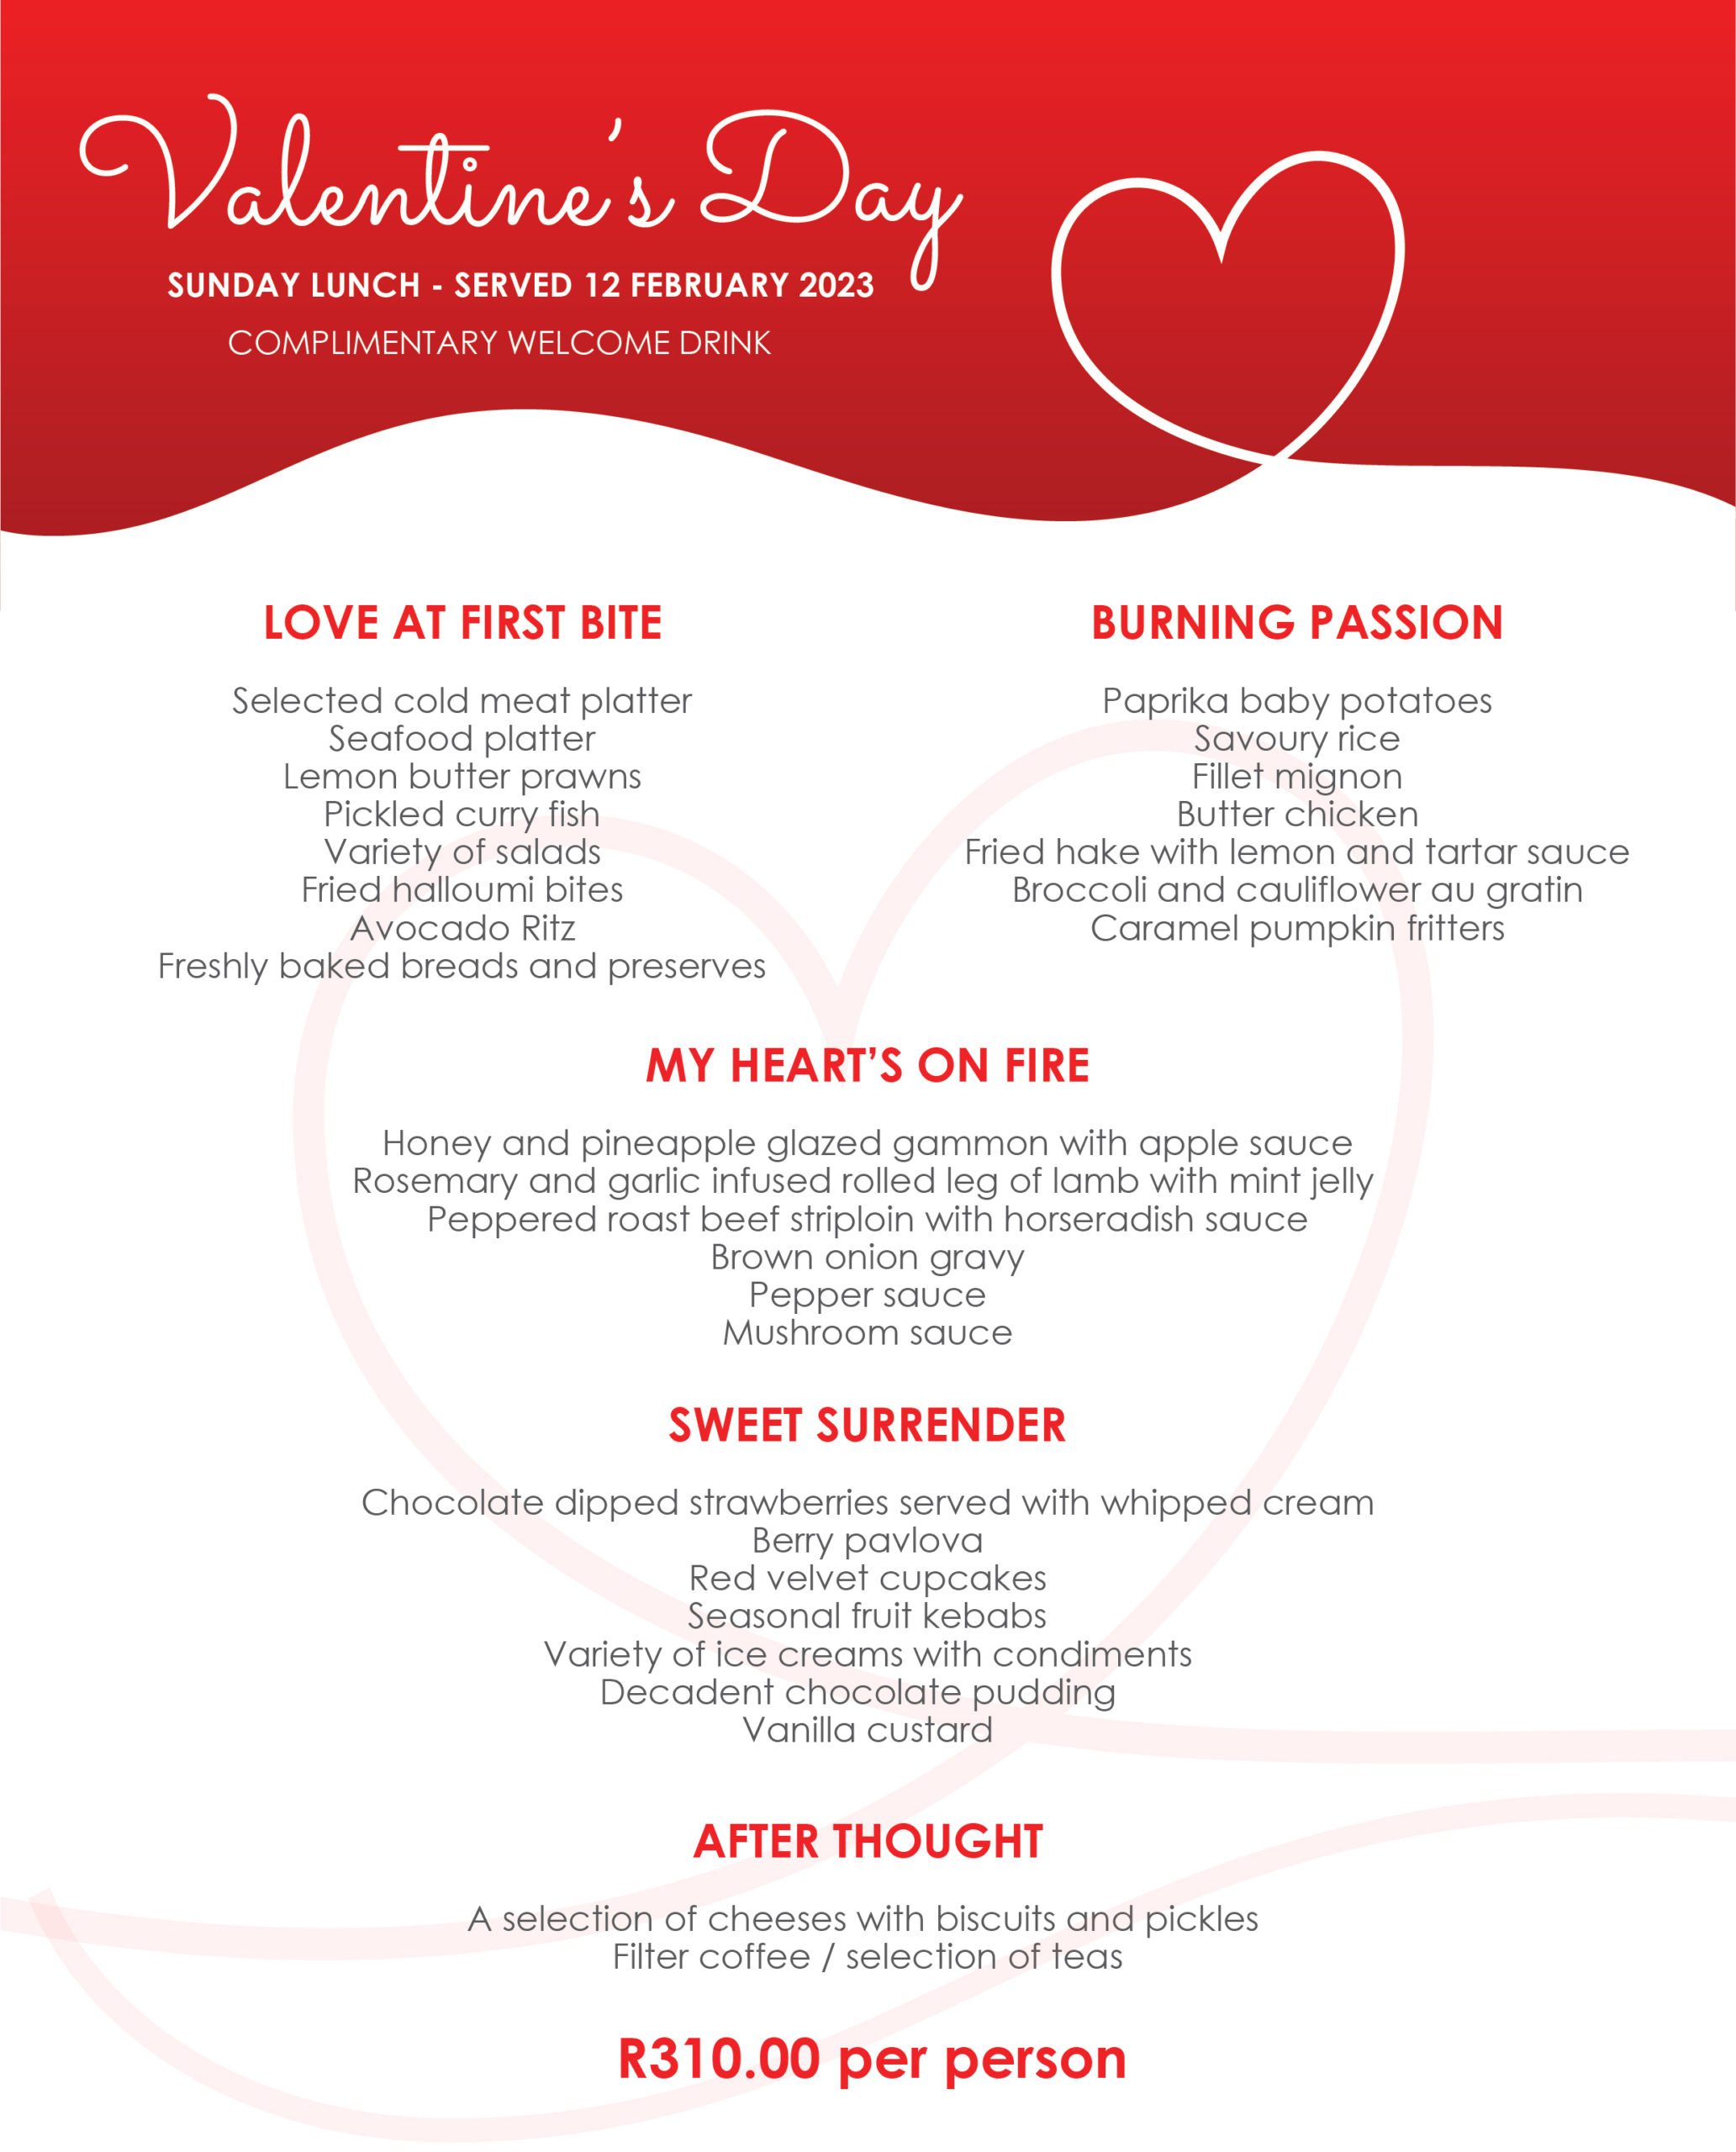 BON Appetits | Valentine’s Lunch at BON Hotel Bloemfontein Central | Valid for 12th of February 2023